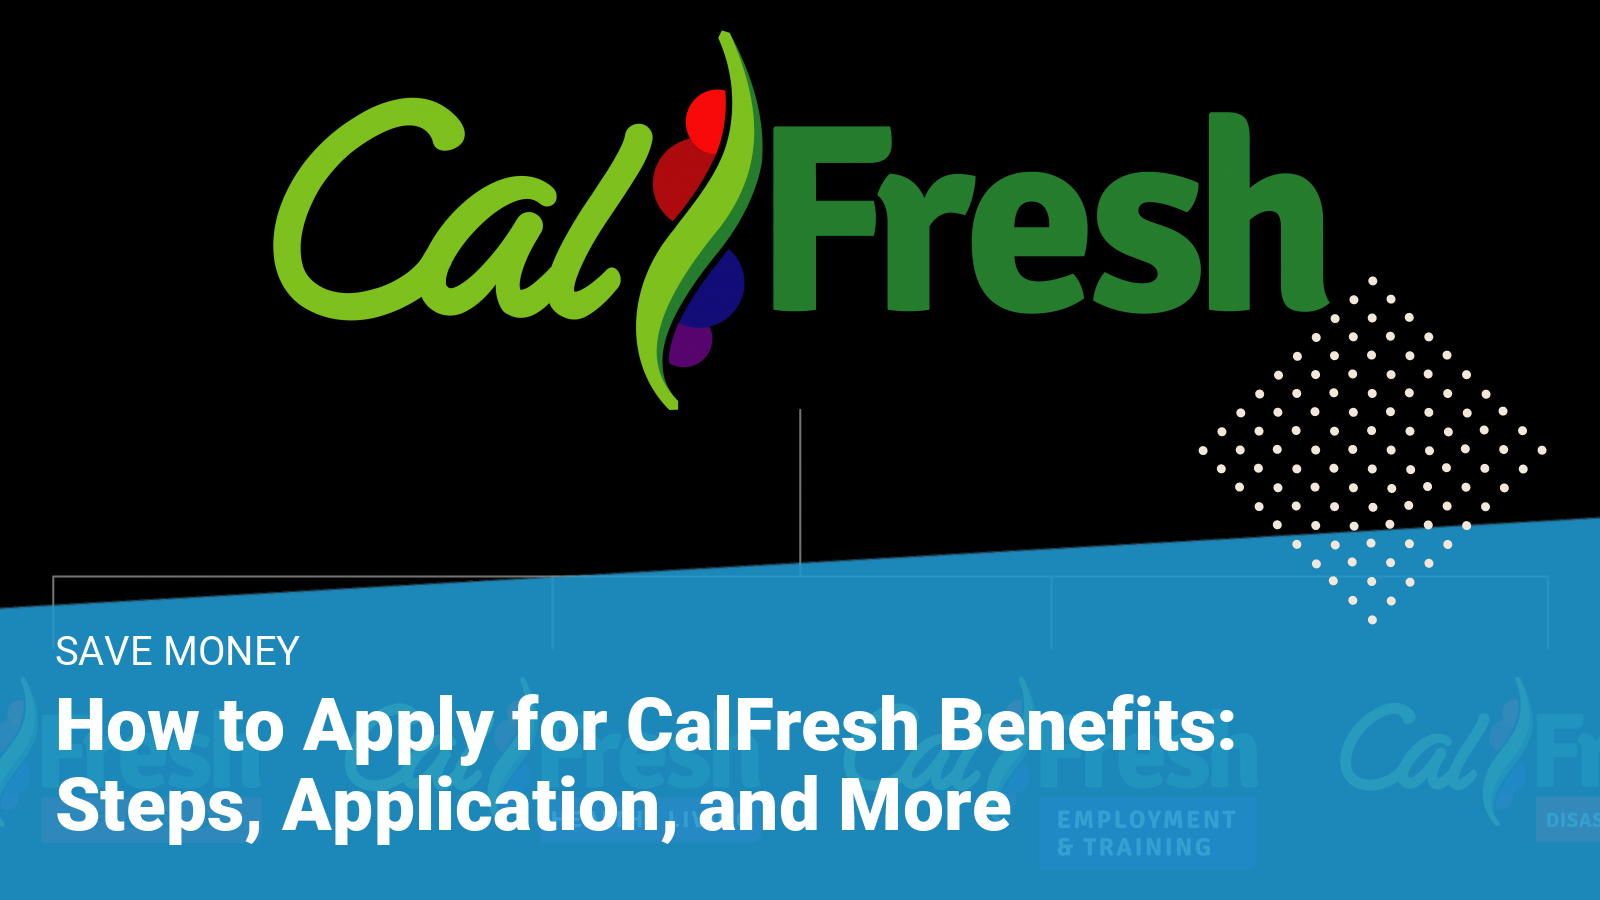 How to Apply for the CalFresh Program